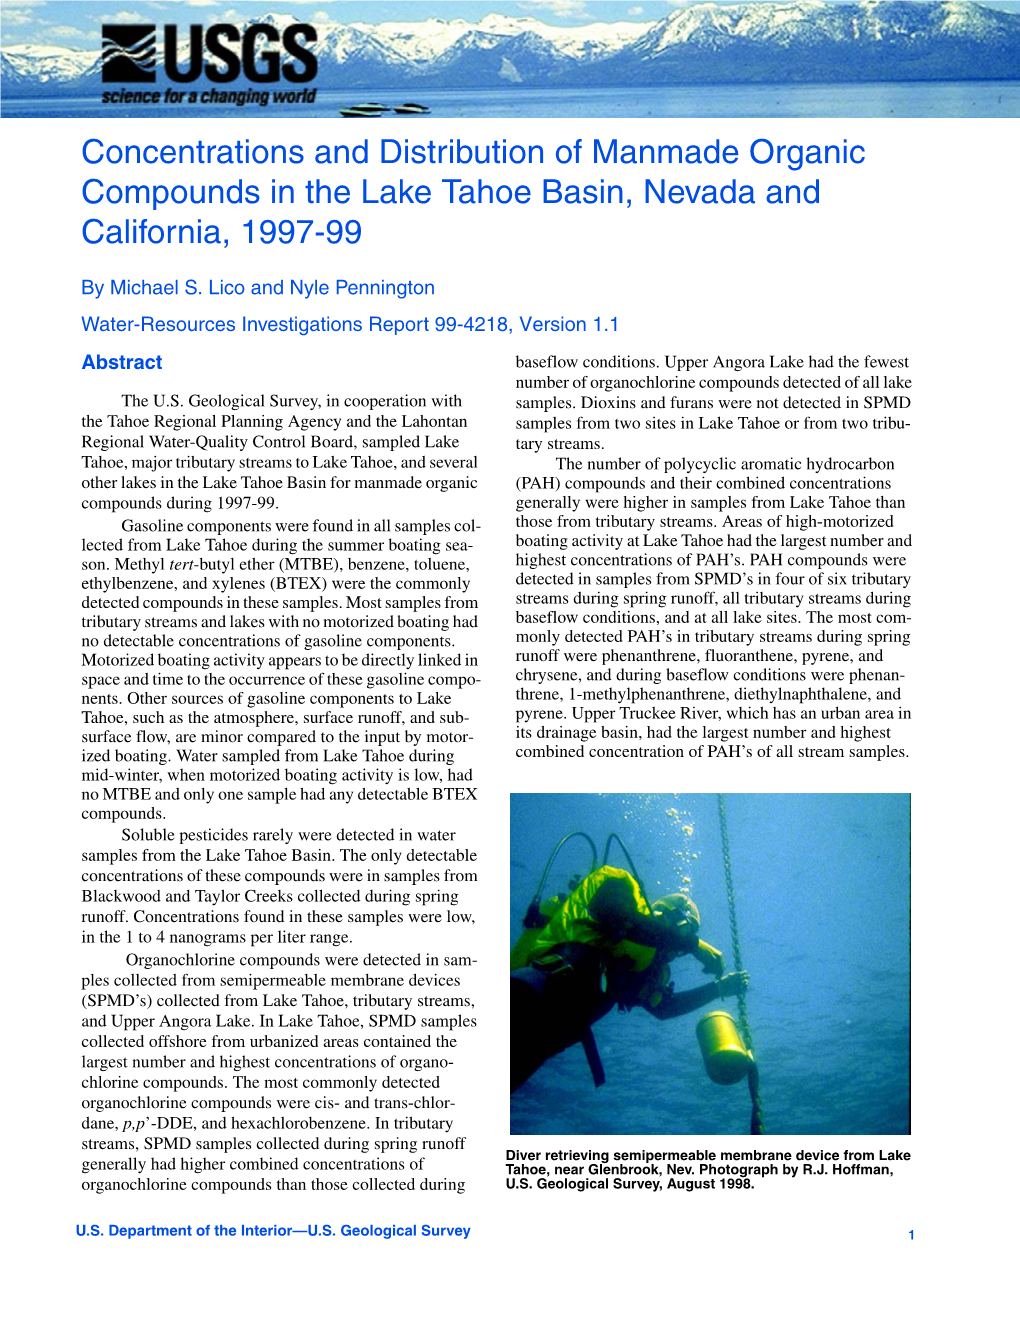 Concentrations and Distribution of Manmade Organic Compounds in the Lake Tahoe Basin, Nevada and California, 1997-99